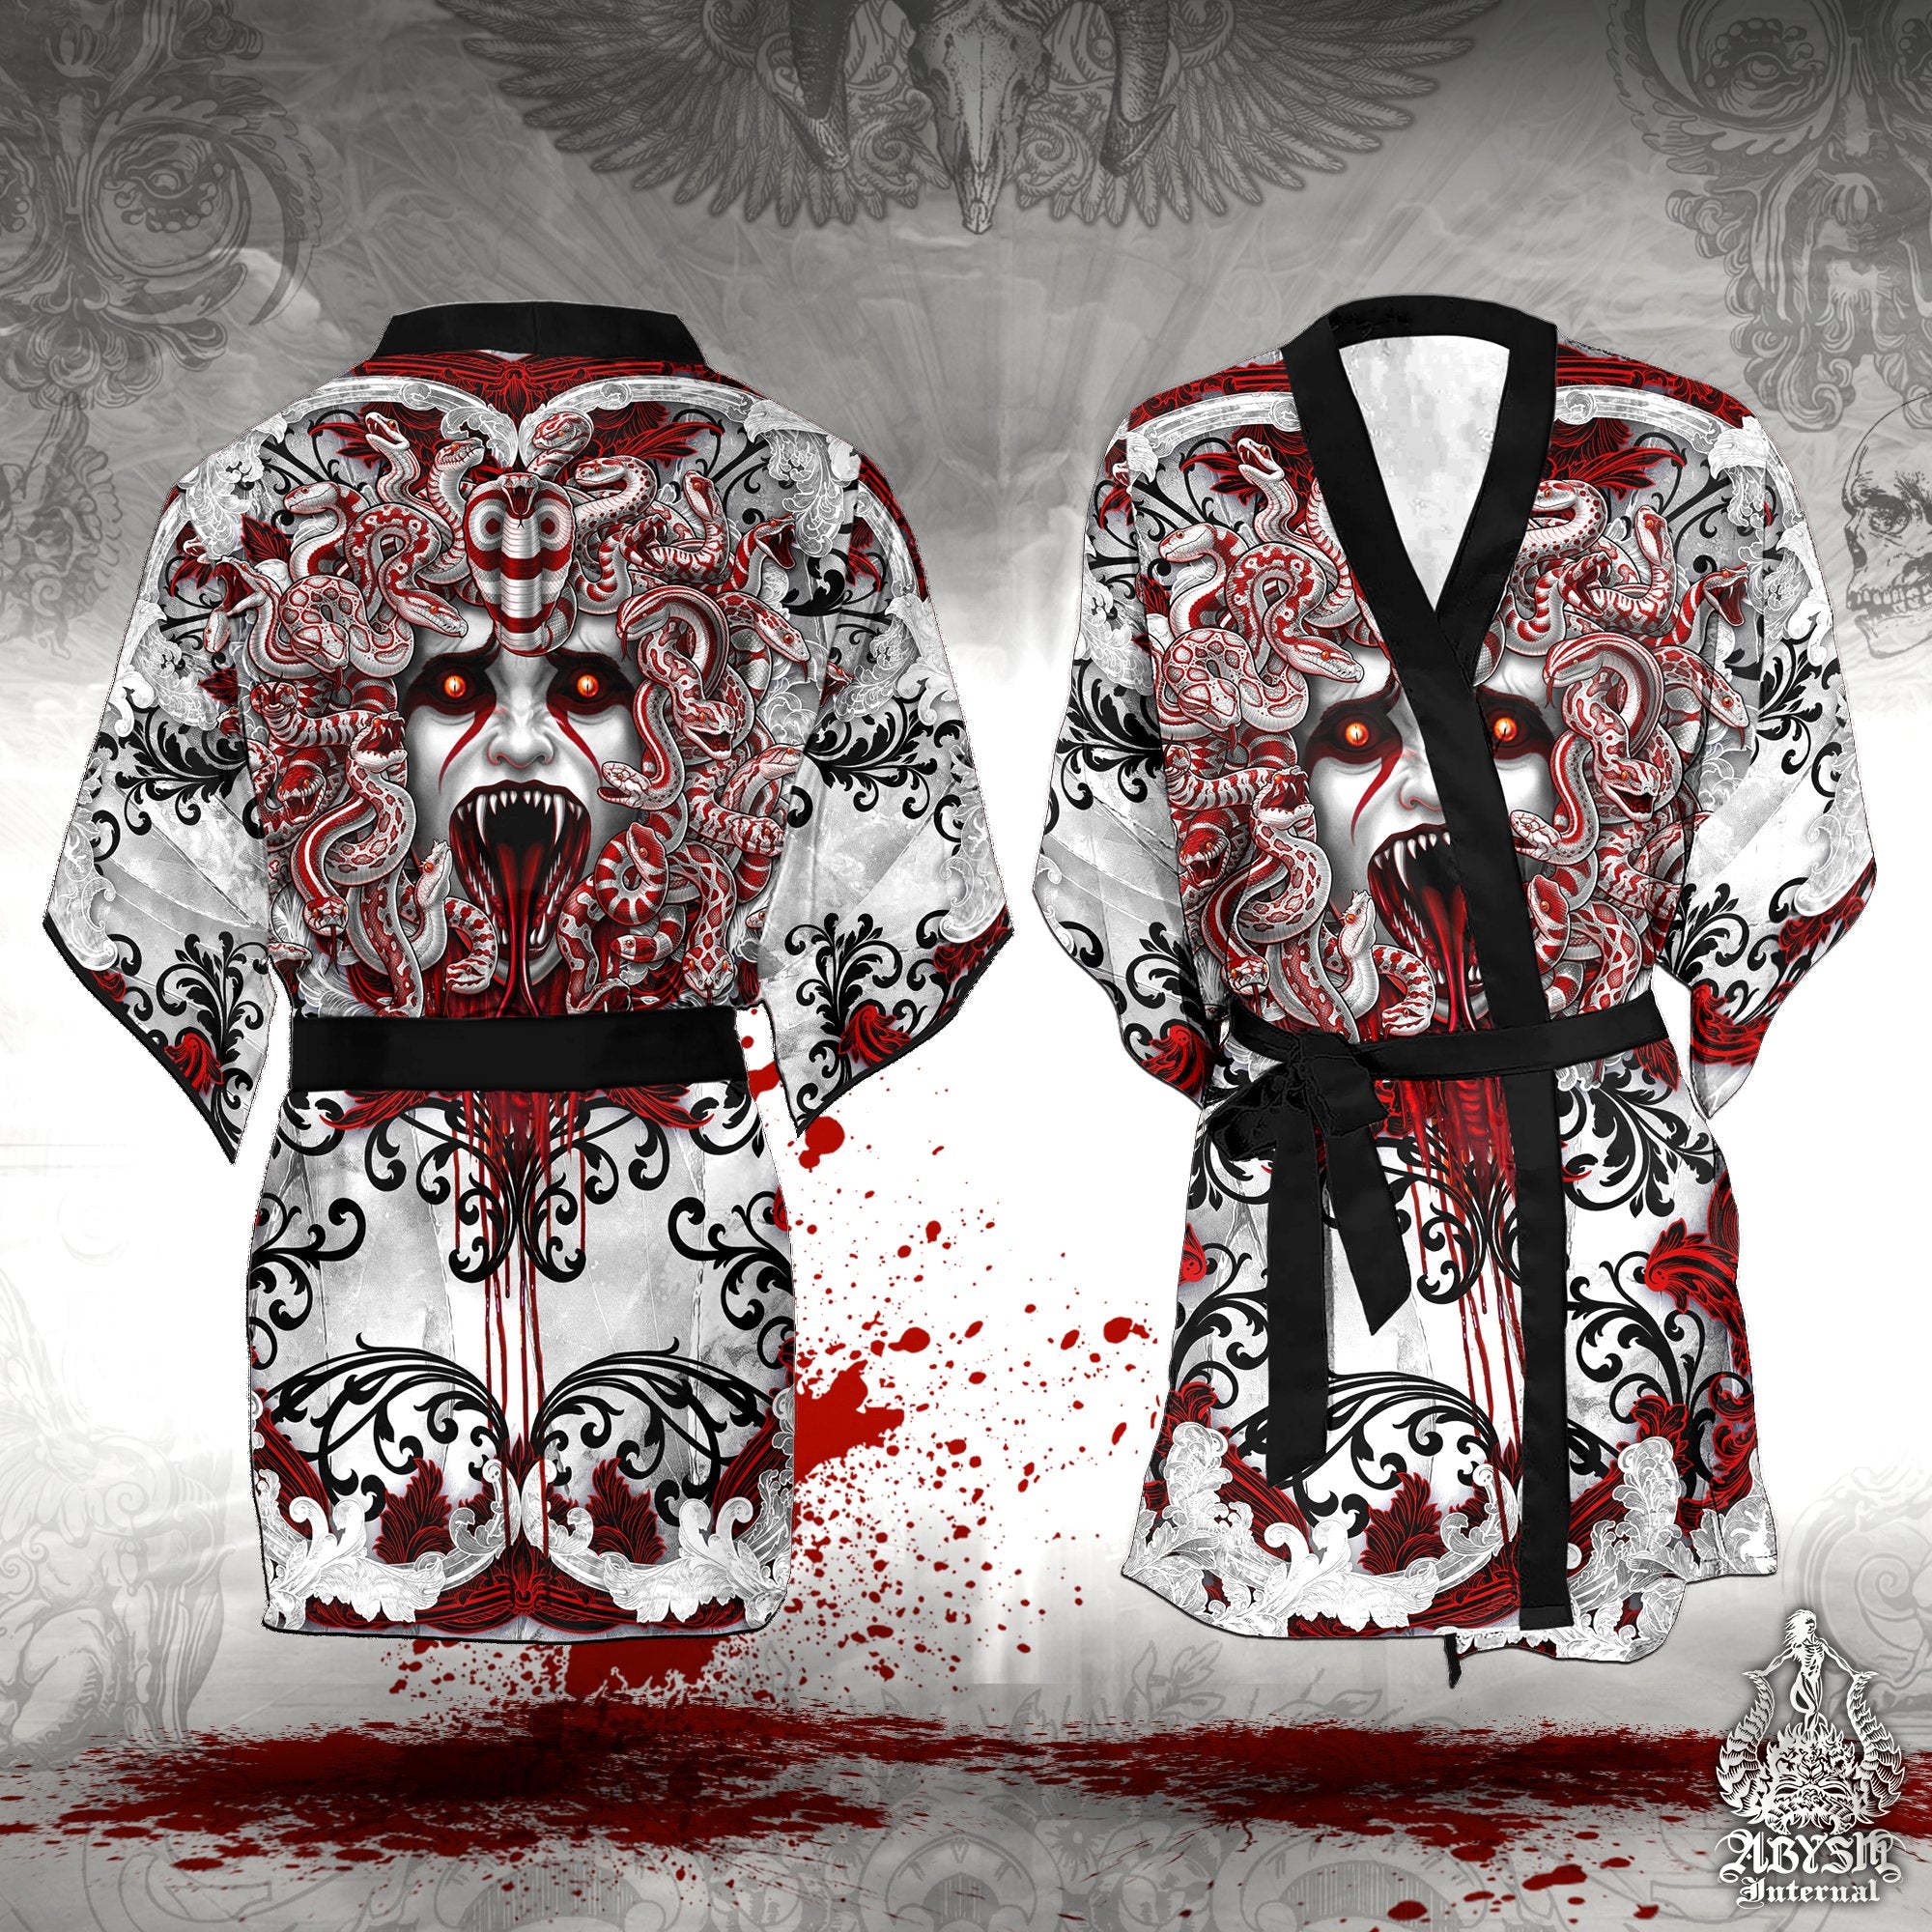 Medusa Skull Short Kimono Robe, Beach Party Outfit, Coverup, Summer Festival, Gothic and Alternative Clothing, Unisex - Bloody White Goth, 2 Faces - Abysm Internal